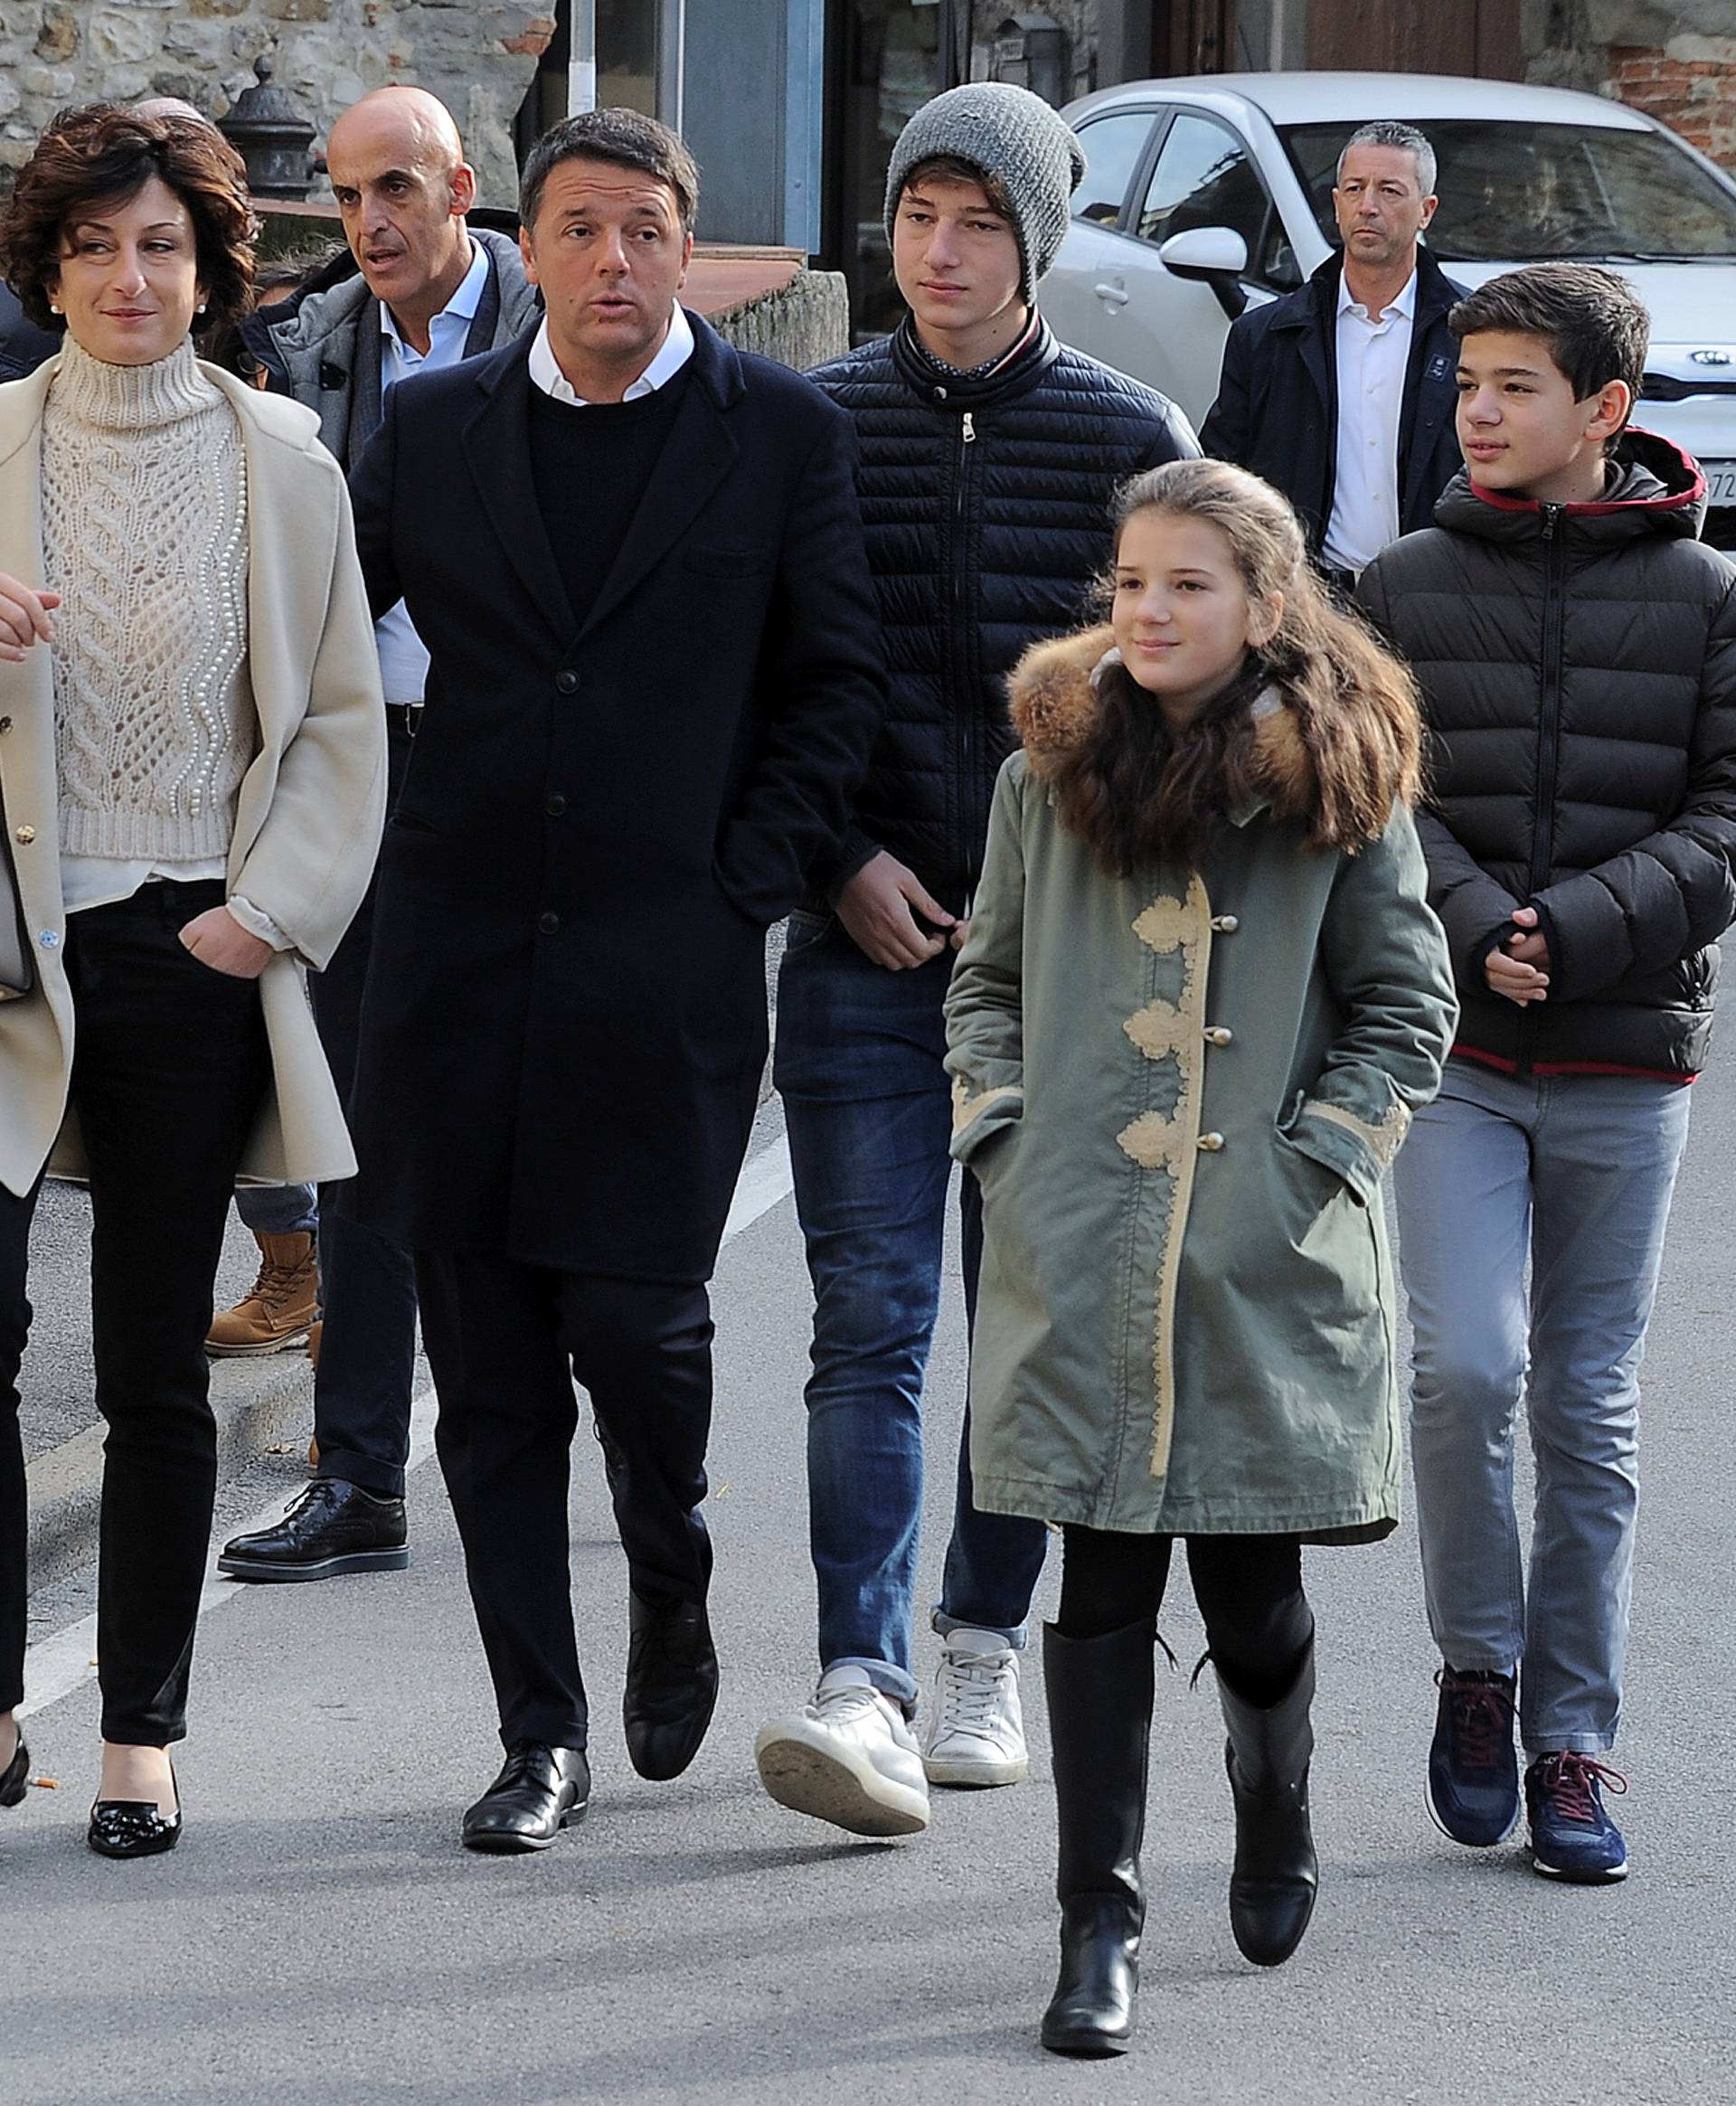 Italian Prime Minister Matteo Renzi and his wife Agnese arrive to cast their votes with their children during the referendum on constitutional reform, in Pontassieve